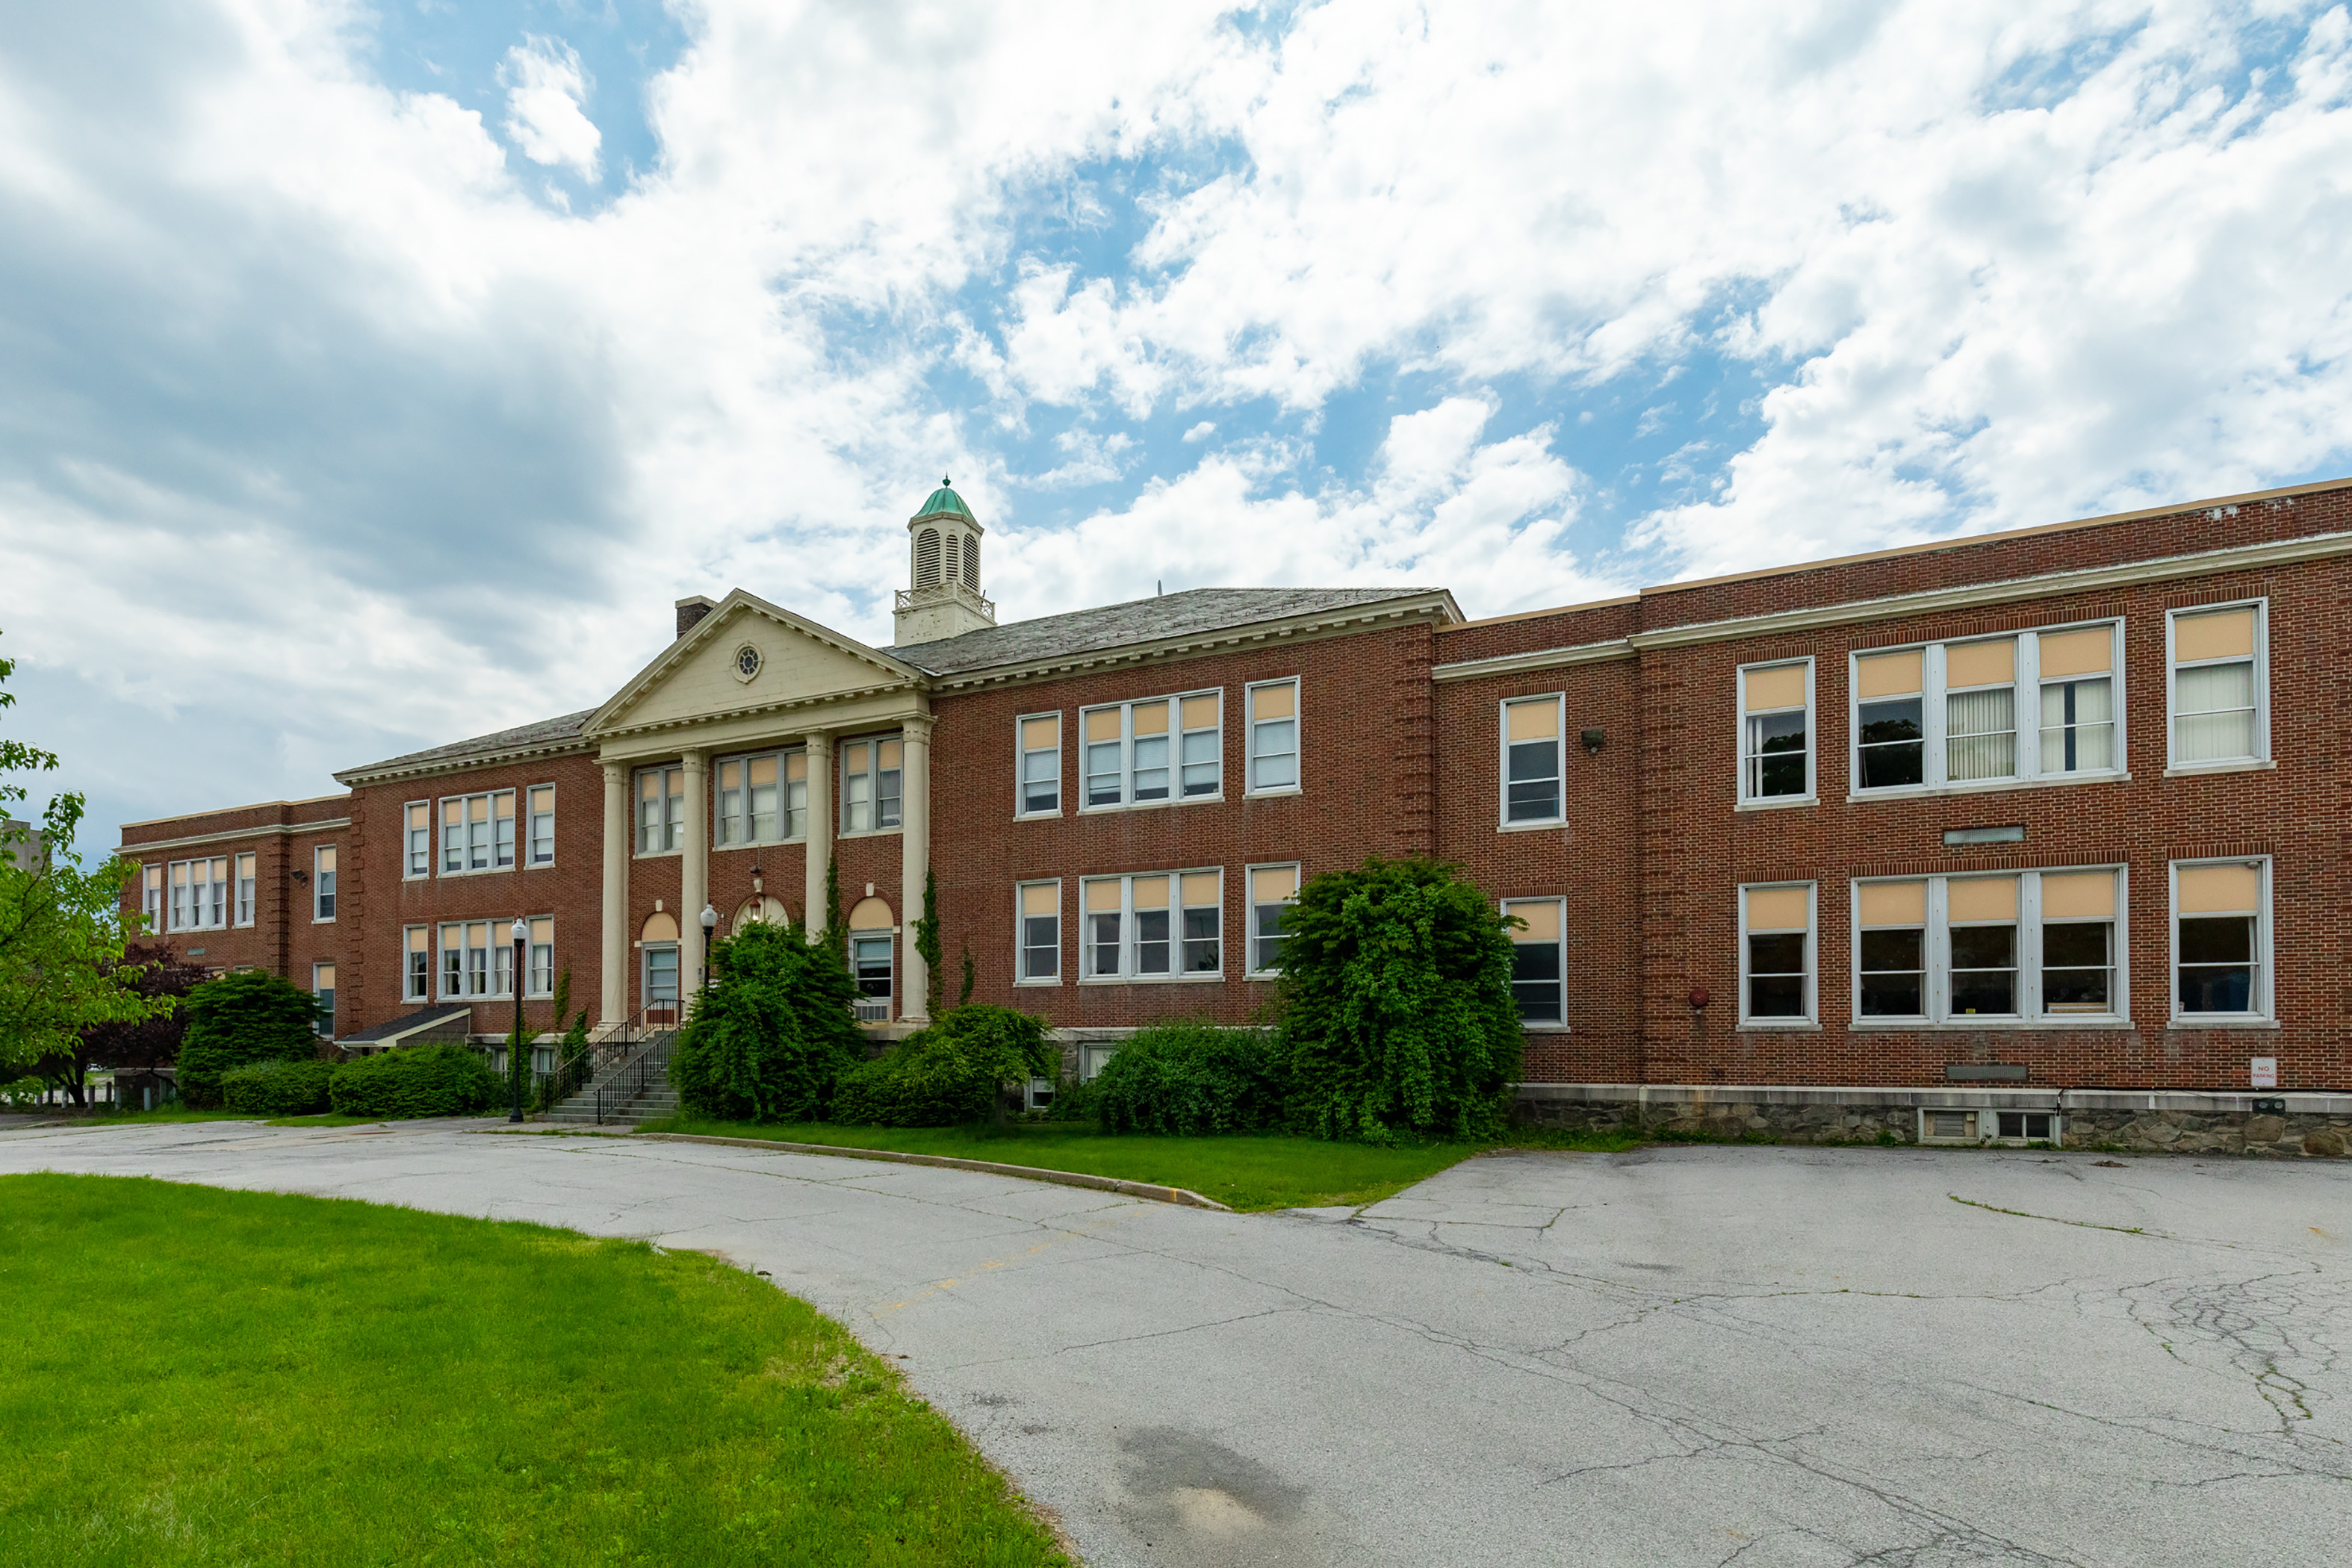 Photo of front of Raymond Ave School building